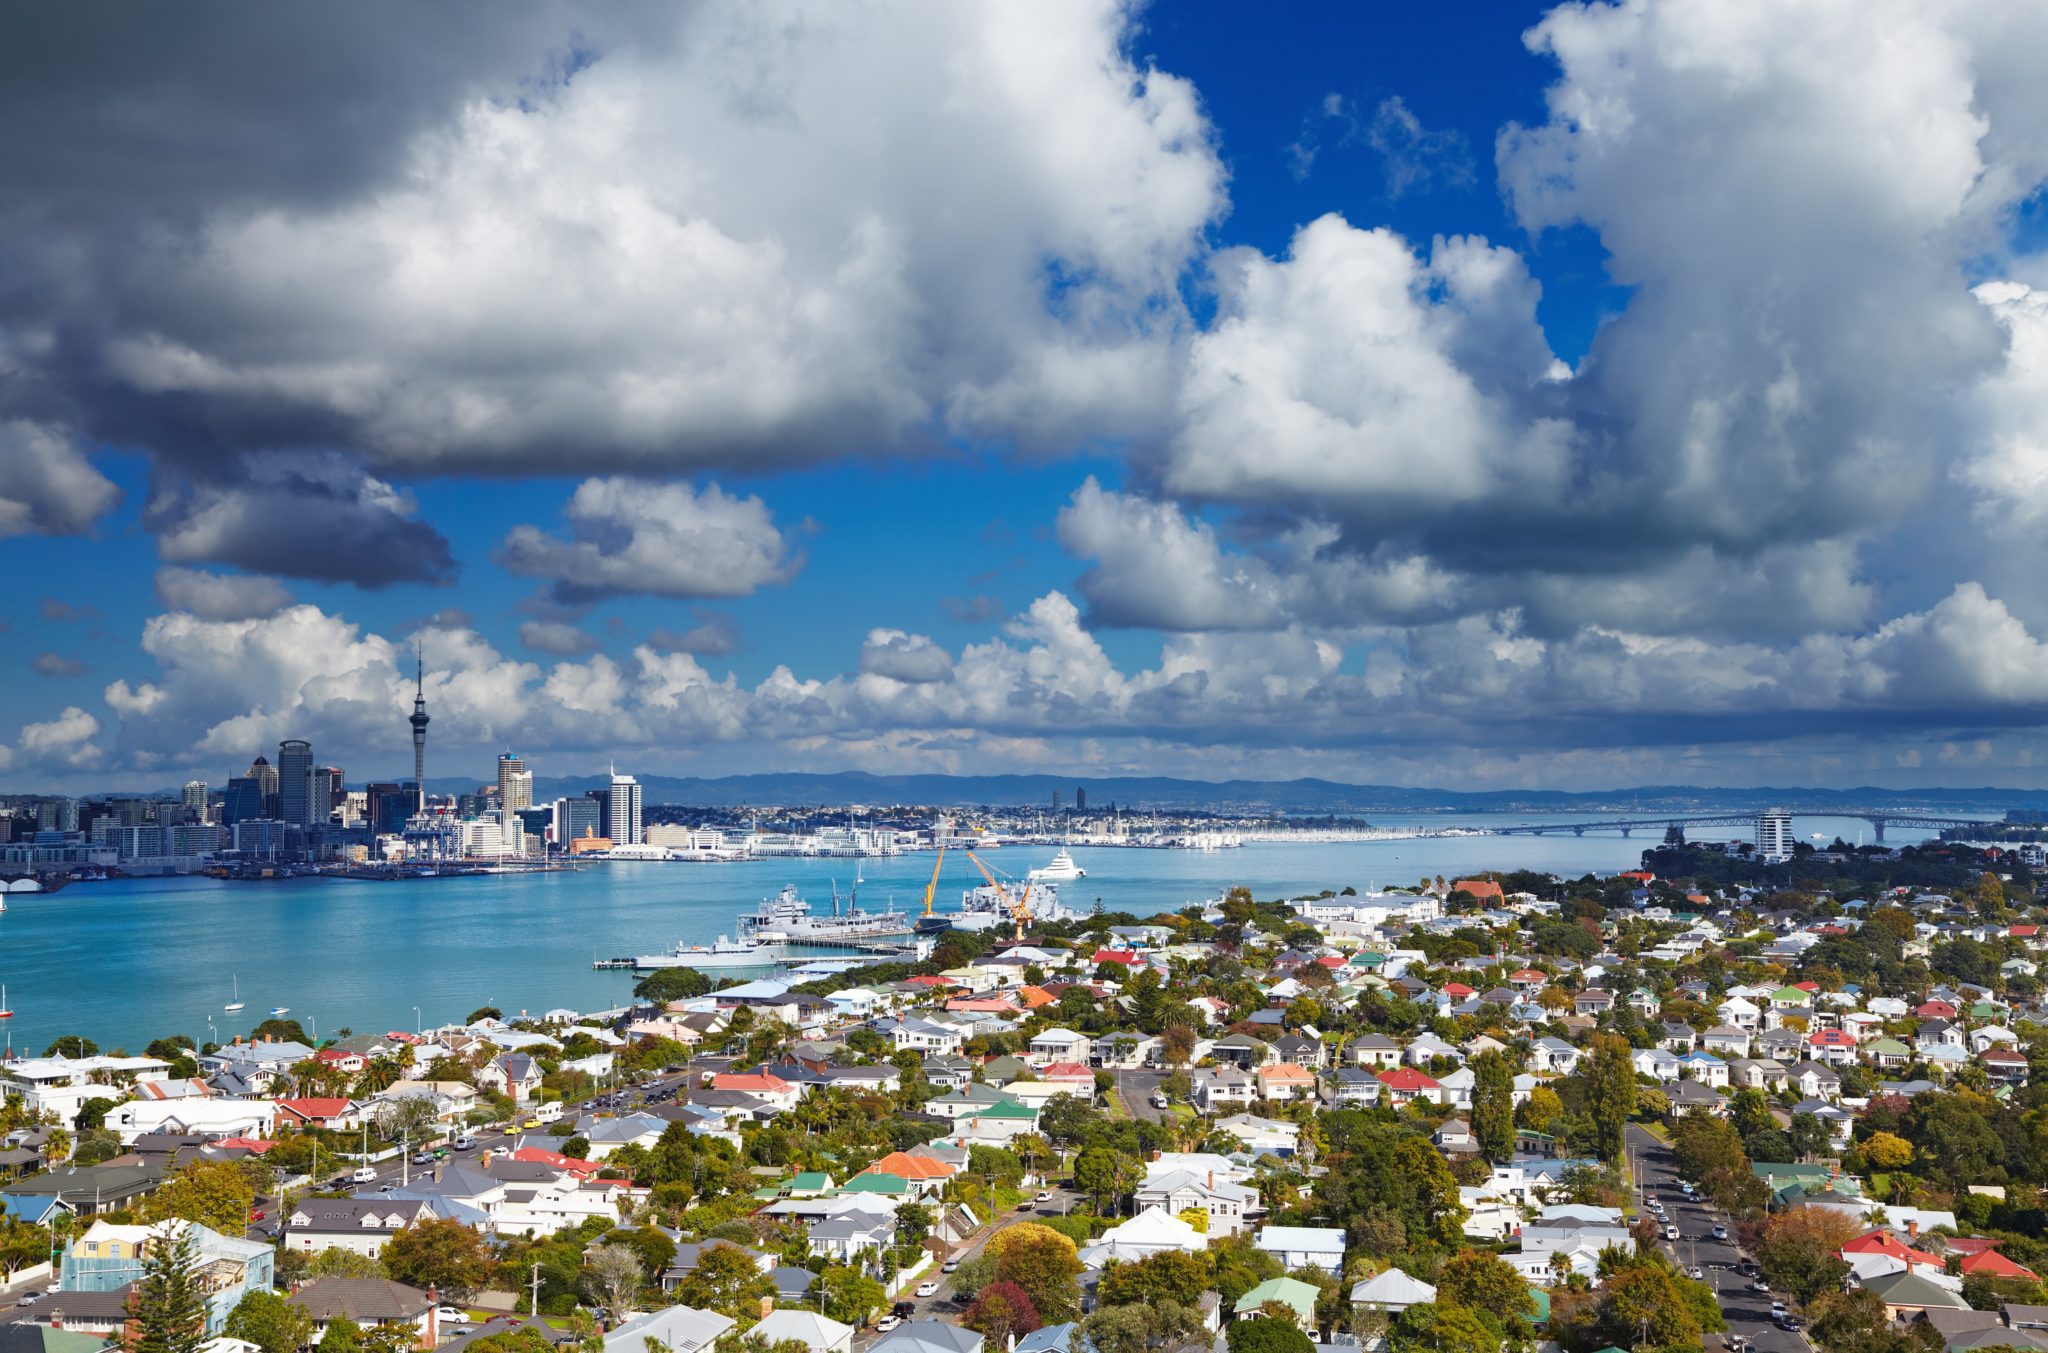 Find out what you can and can't claim against your rental property with NZ Rental Tax Services.